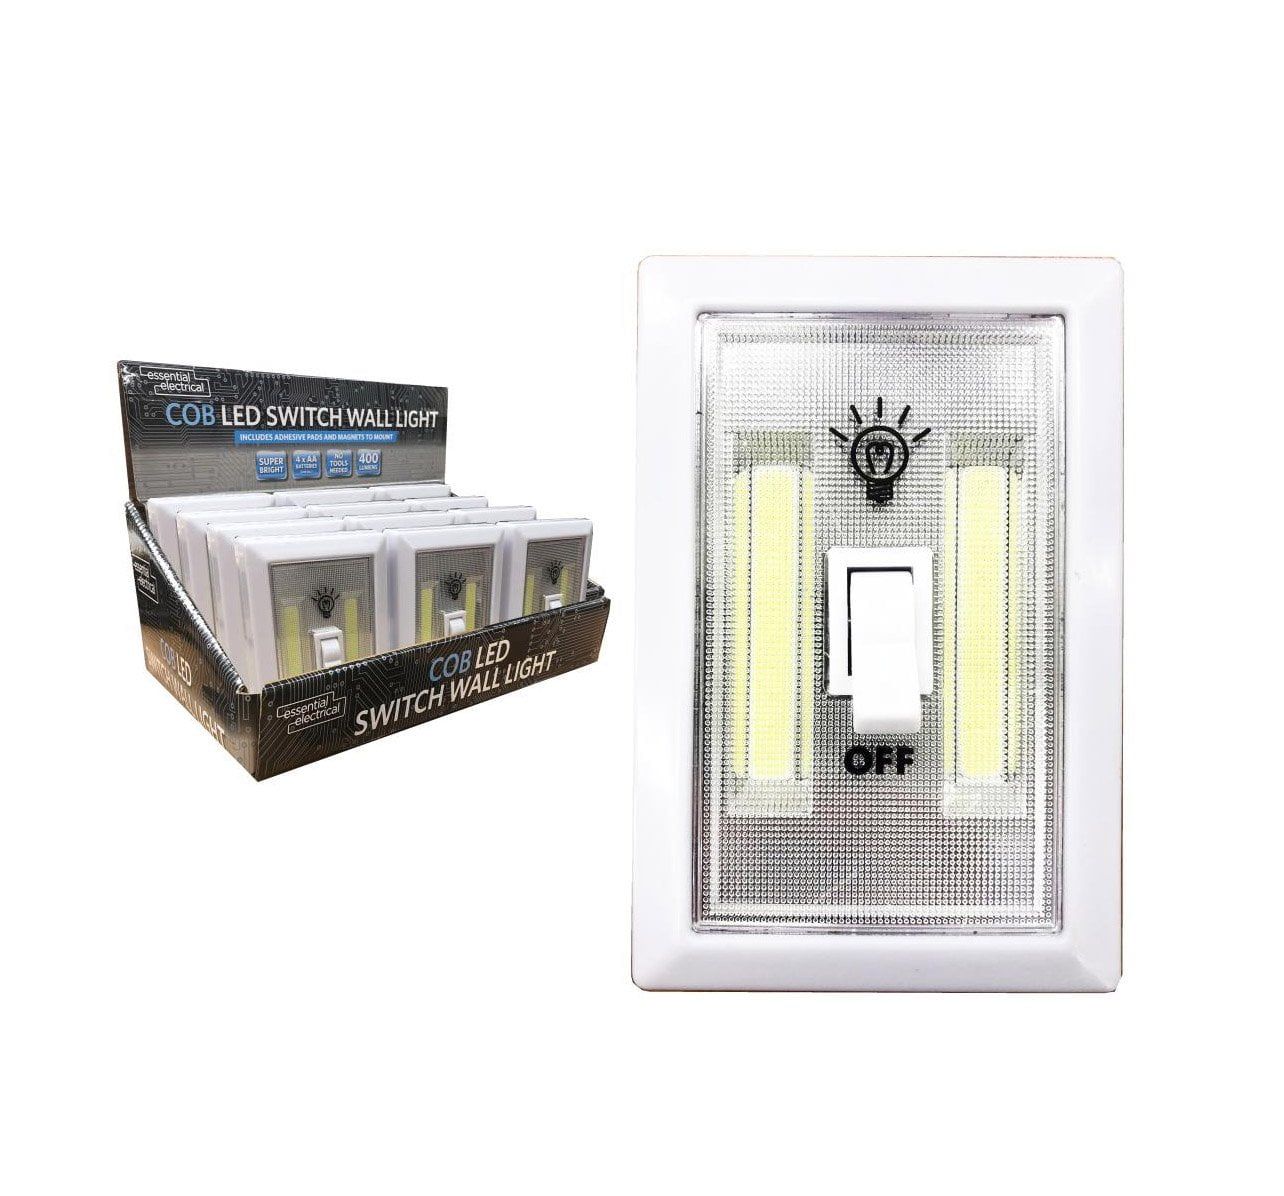 LED Battery Operated Wall Switch Night Light 400 Lumens 1 Pc Home Diy 2728 (Parcel Rate)